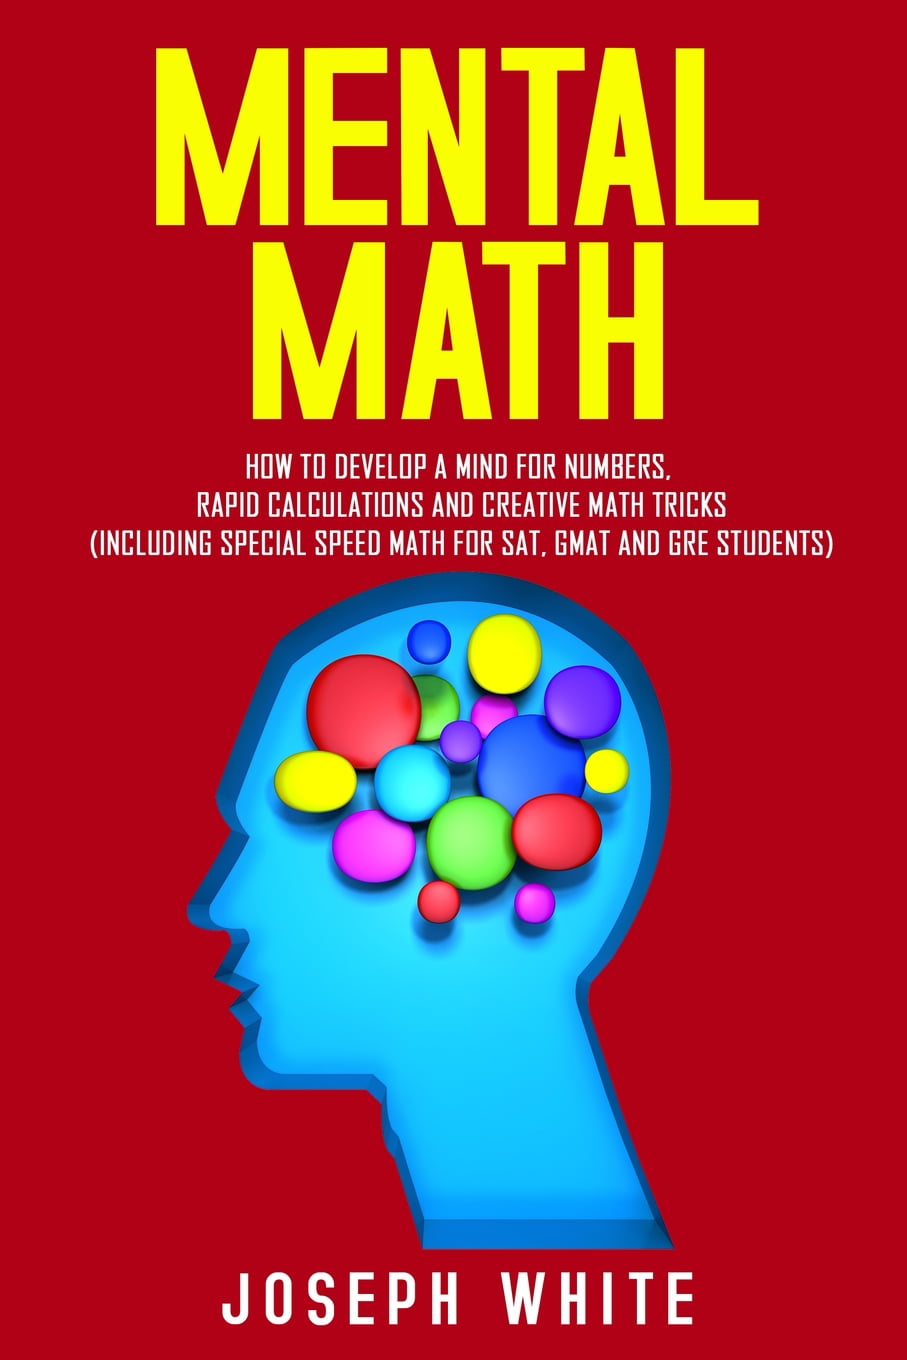 Mental Math: How to Develop a Mind for Numbers, Rapid Calculations and